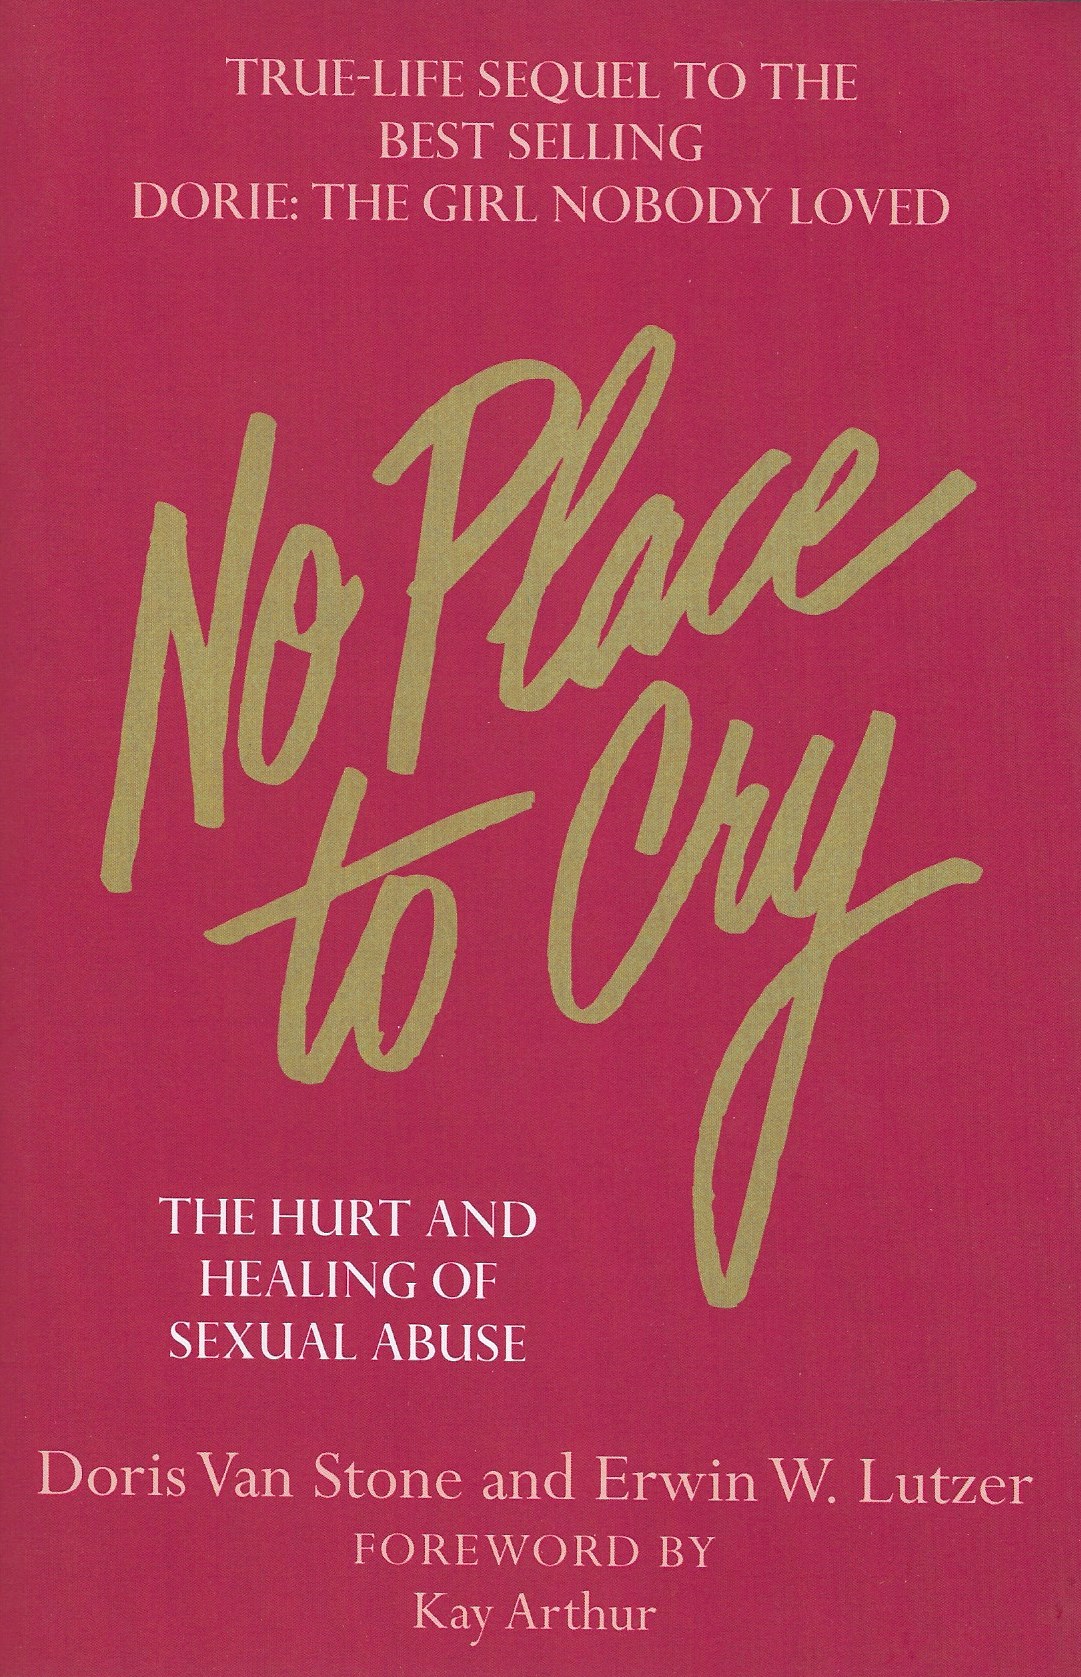 NO PLACE TO CRY Dorie Van Stone